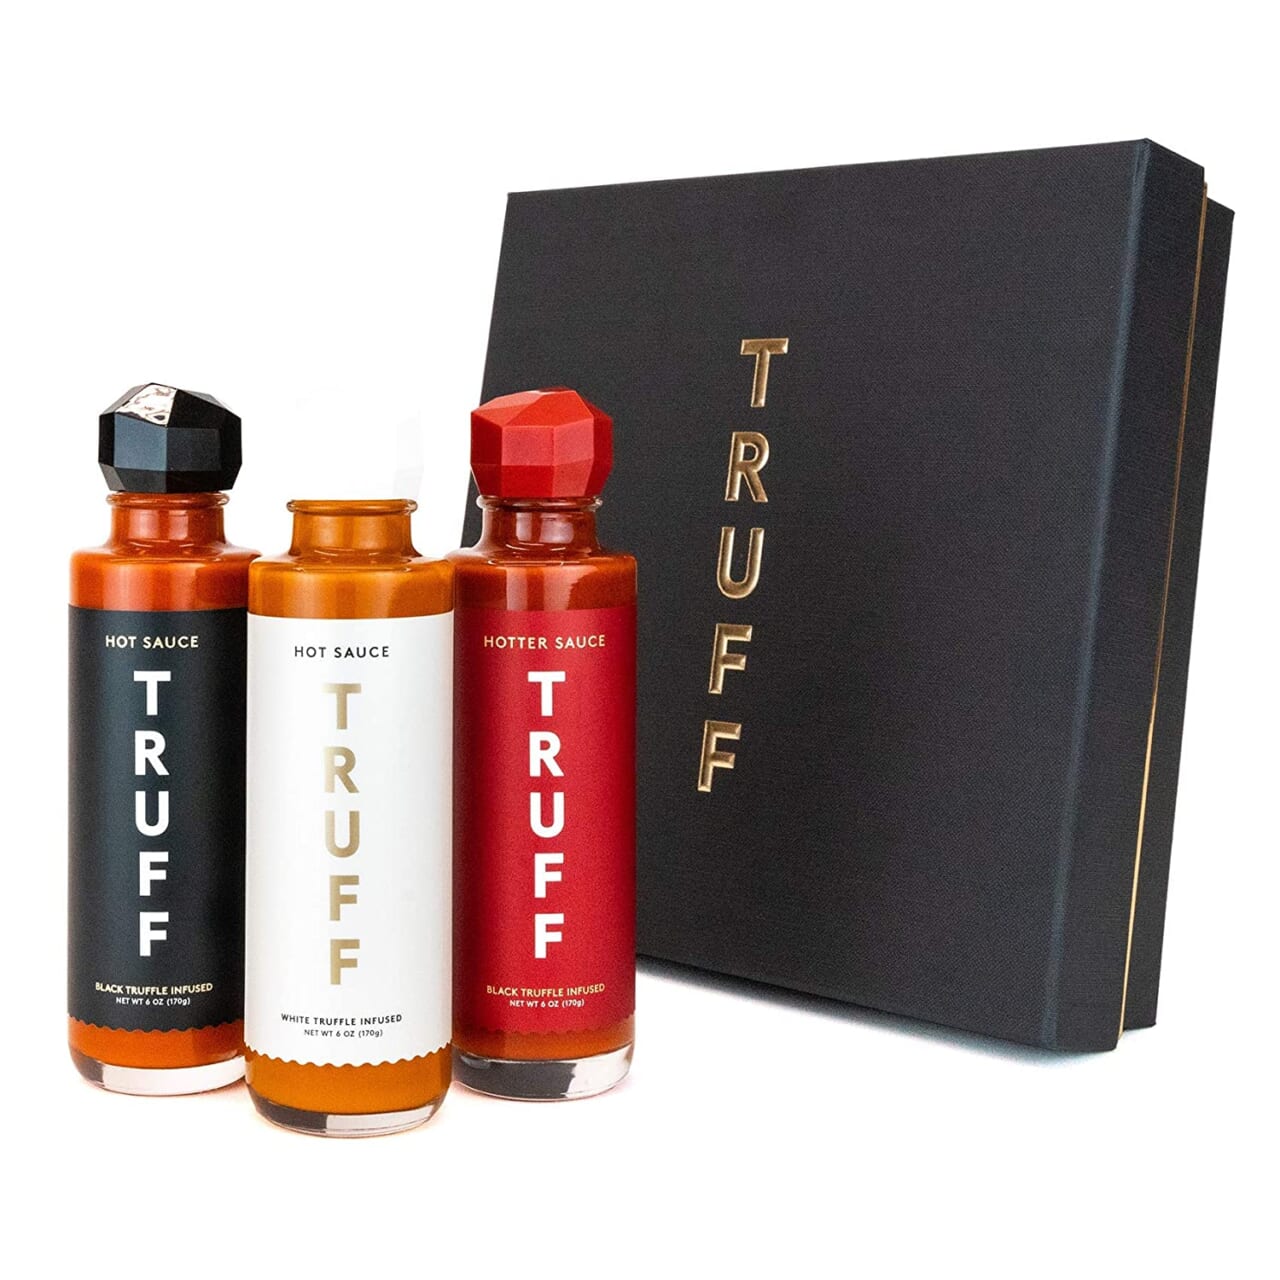 TRUFF Hot Sauce Variety Pack - Perfect gift for Truffle Lovers